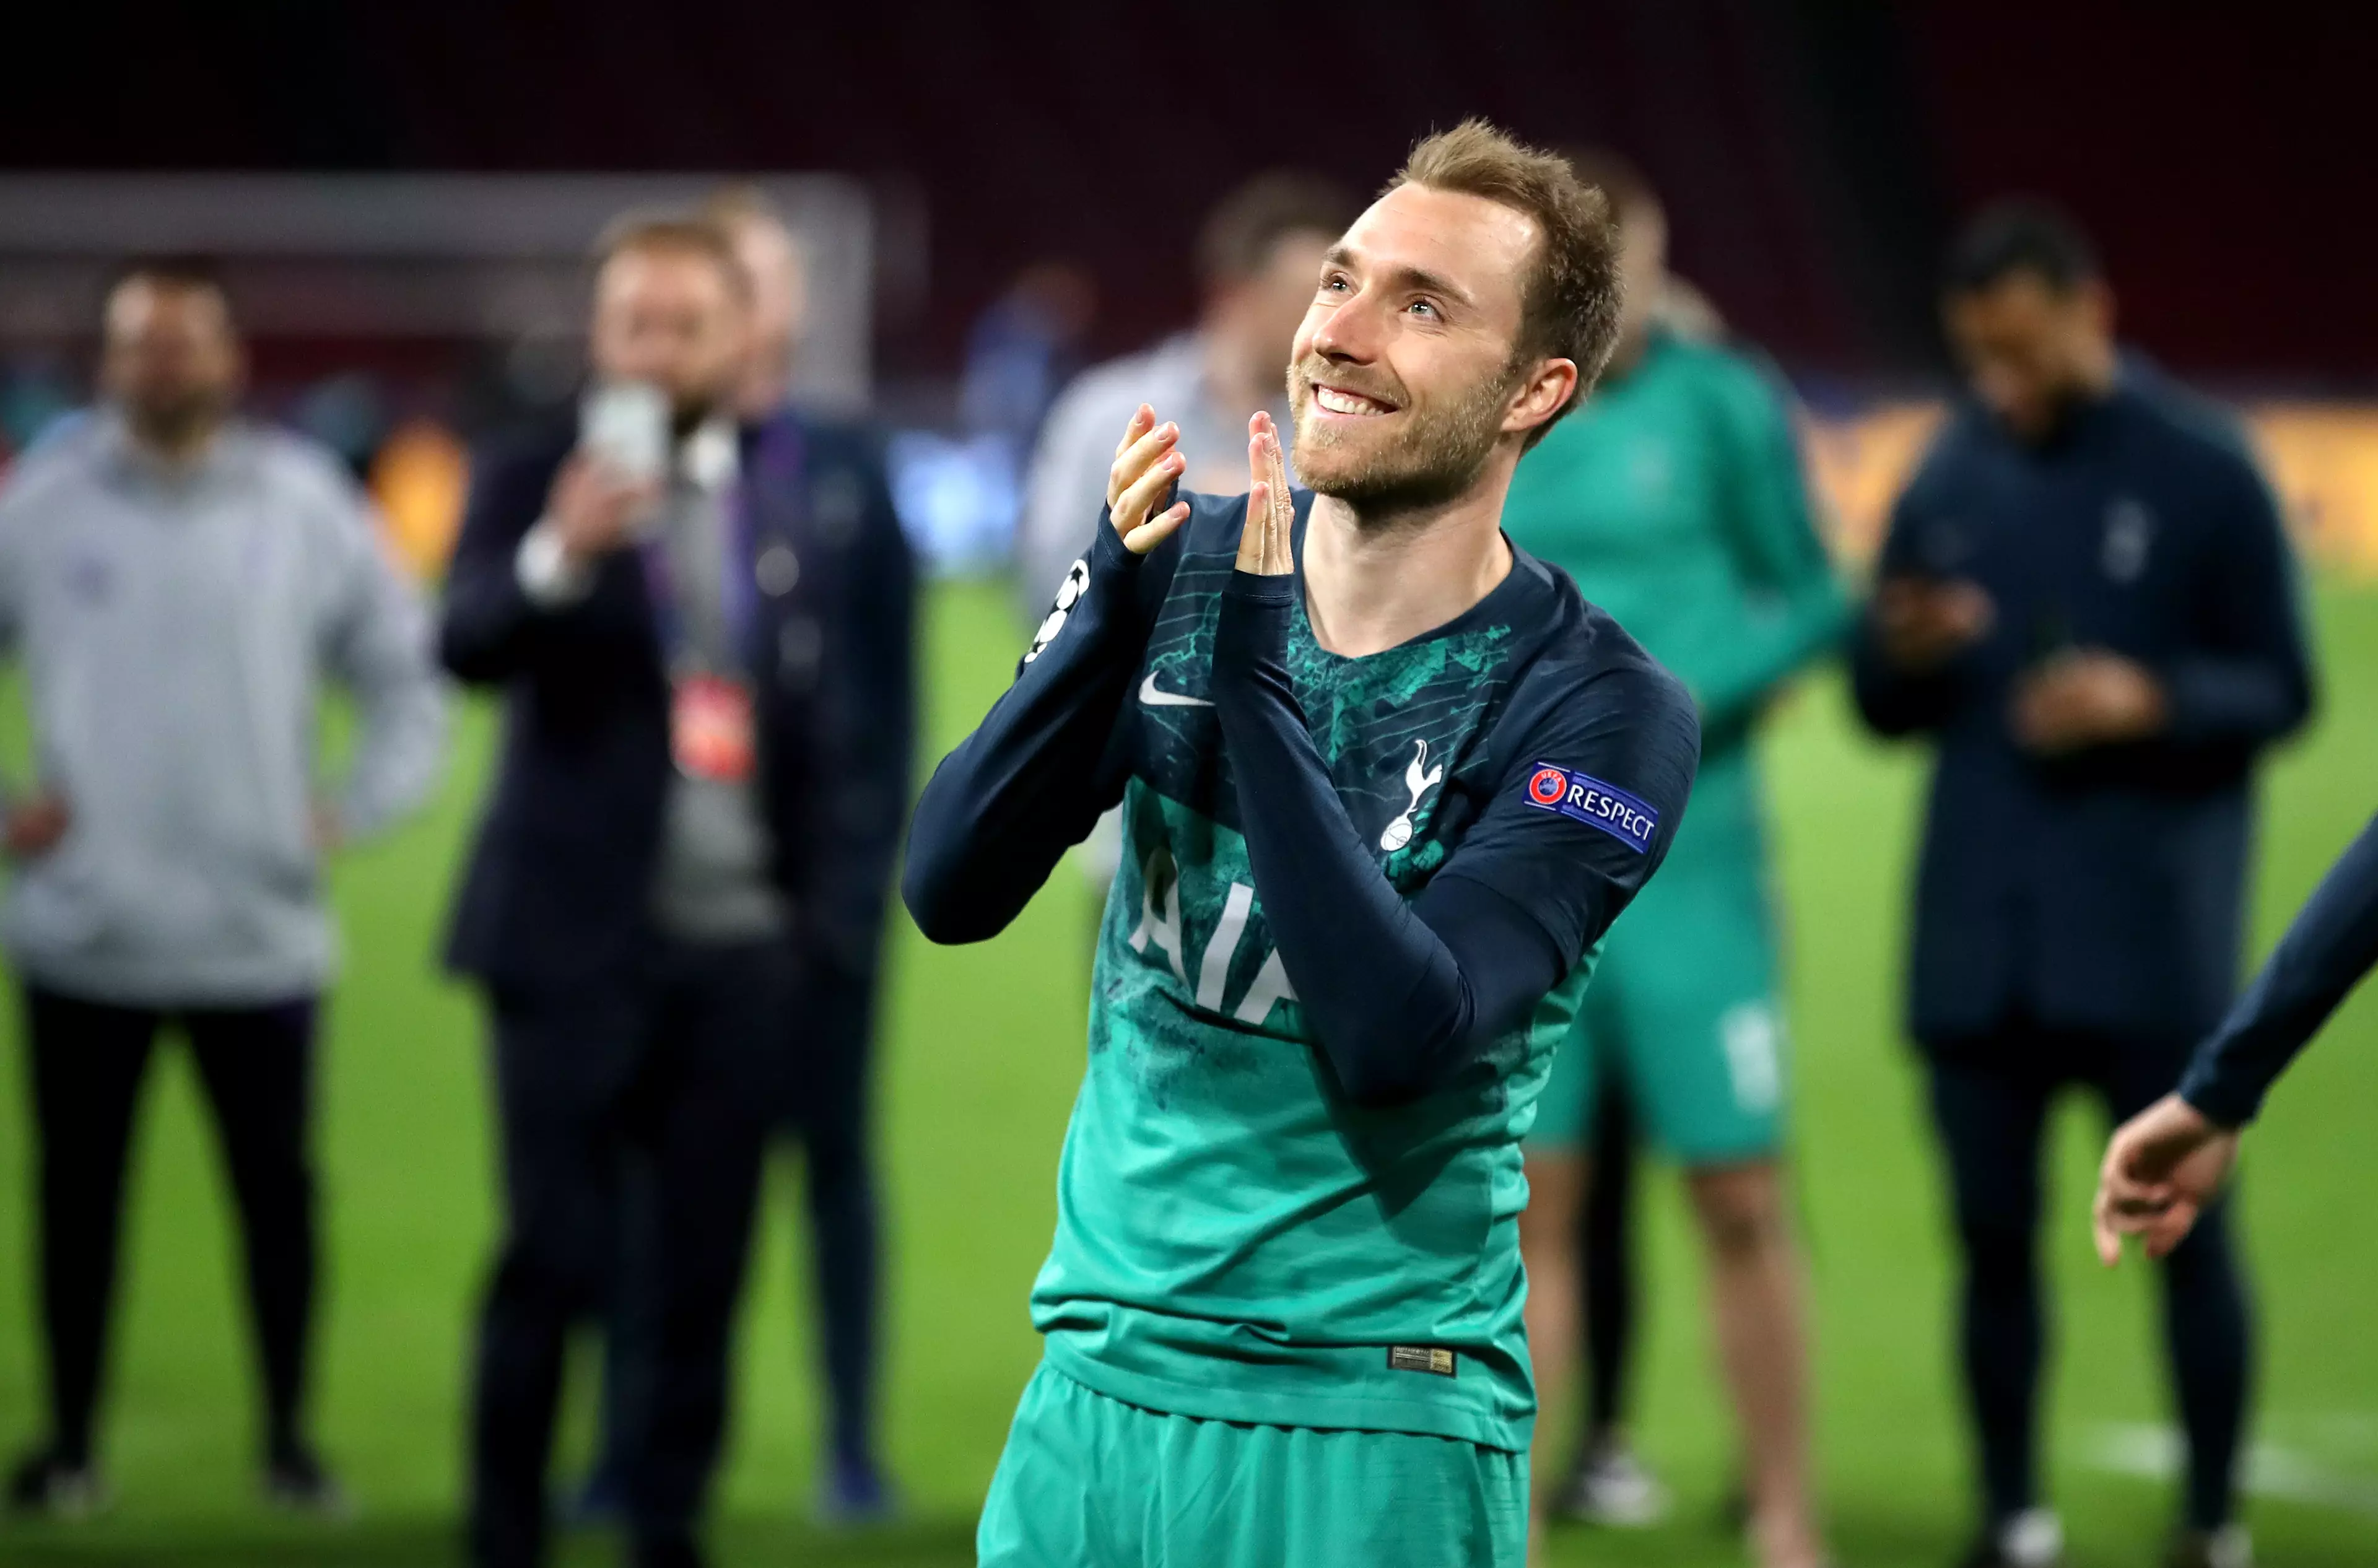 Eriksen revealed he wants to leave Spurs. Image: PA Images